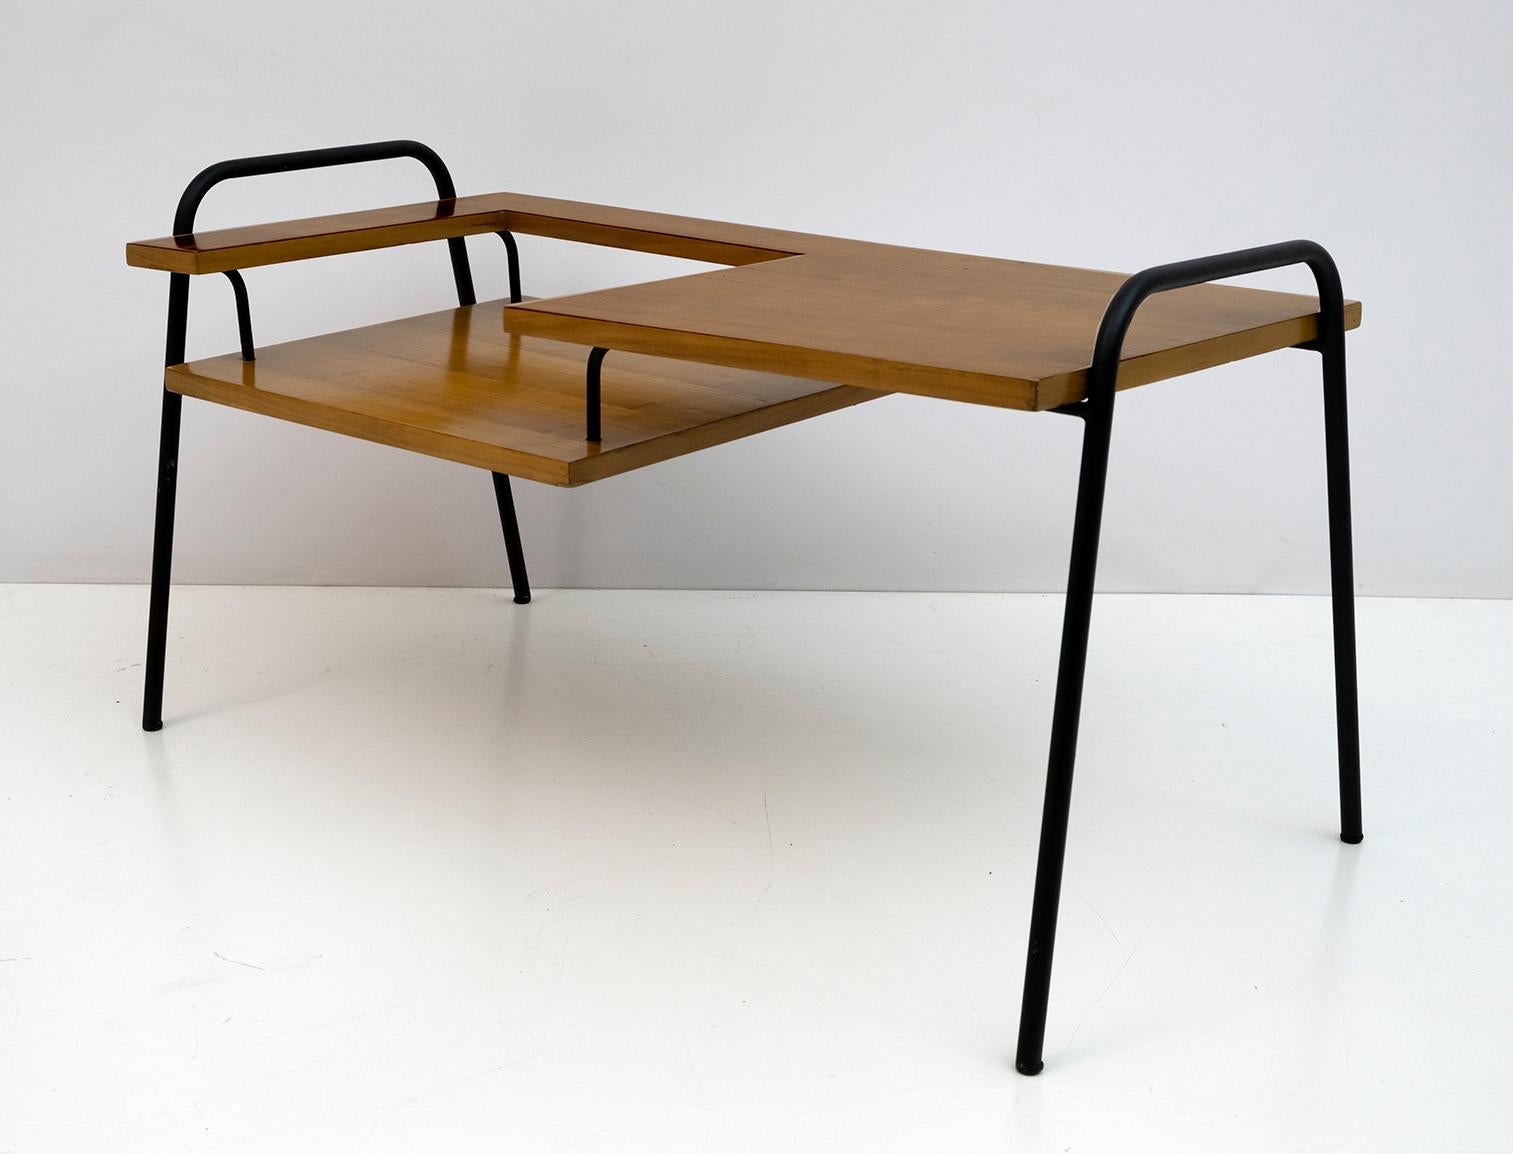 Particular coffee table with structure in lacquered metal and wood.
Produced by the La Permanente Mobili Consortium, Italy, 1953

Taichiro Nakai is an incredibly talented Japanese designer, best known for his participation in the Selective